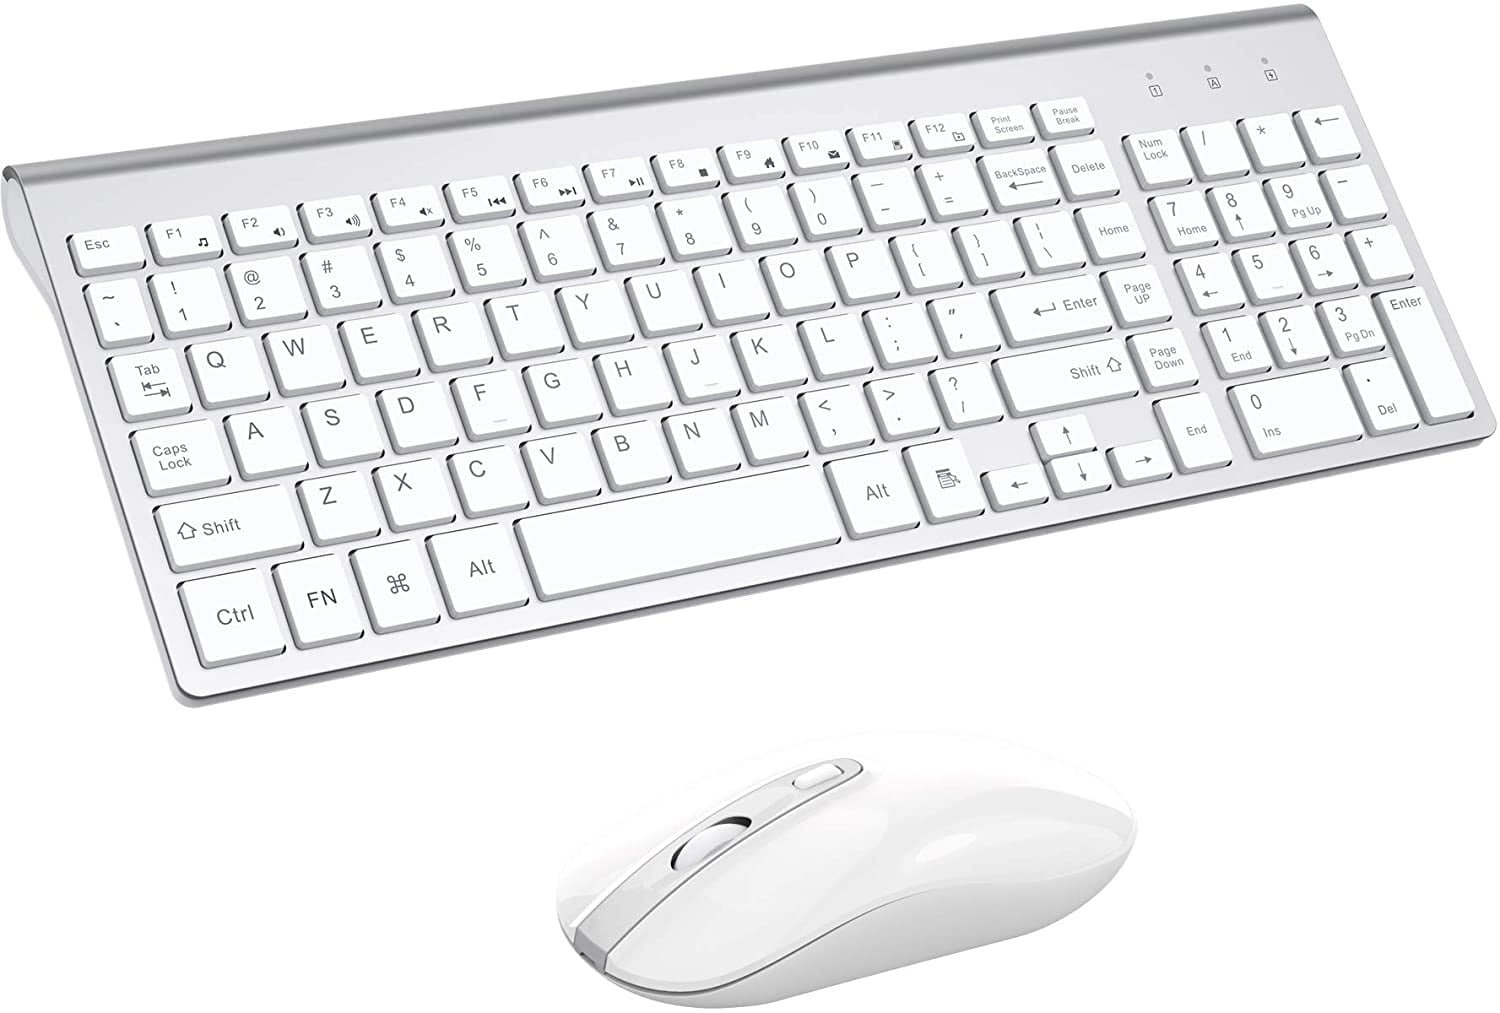 JOYACCESS USB 2.4G Slim Keyboard and Mouse with Numeric Keypad,Ergonomic,Less noise,Reliable Connection,Adjustable DPI for Windows Desktop Surface Smart T Portable Wireless Keyboard Mouse Laptop